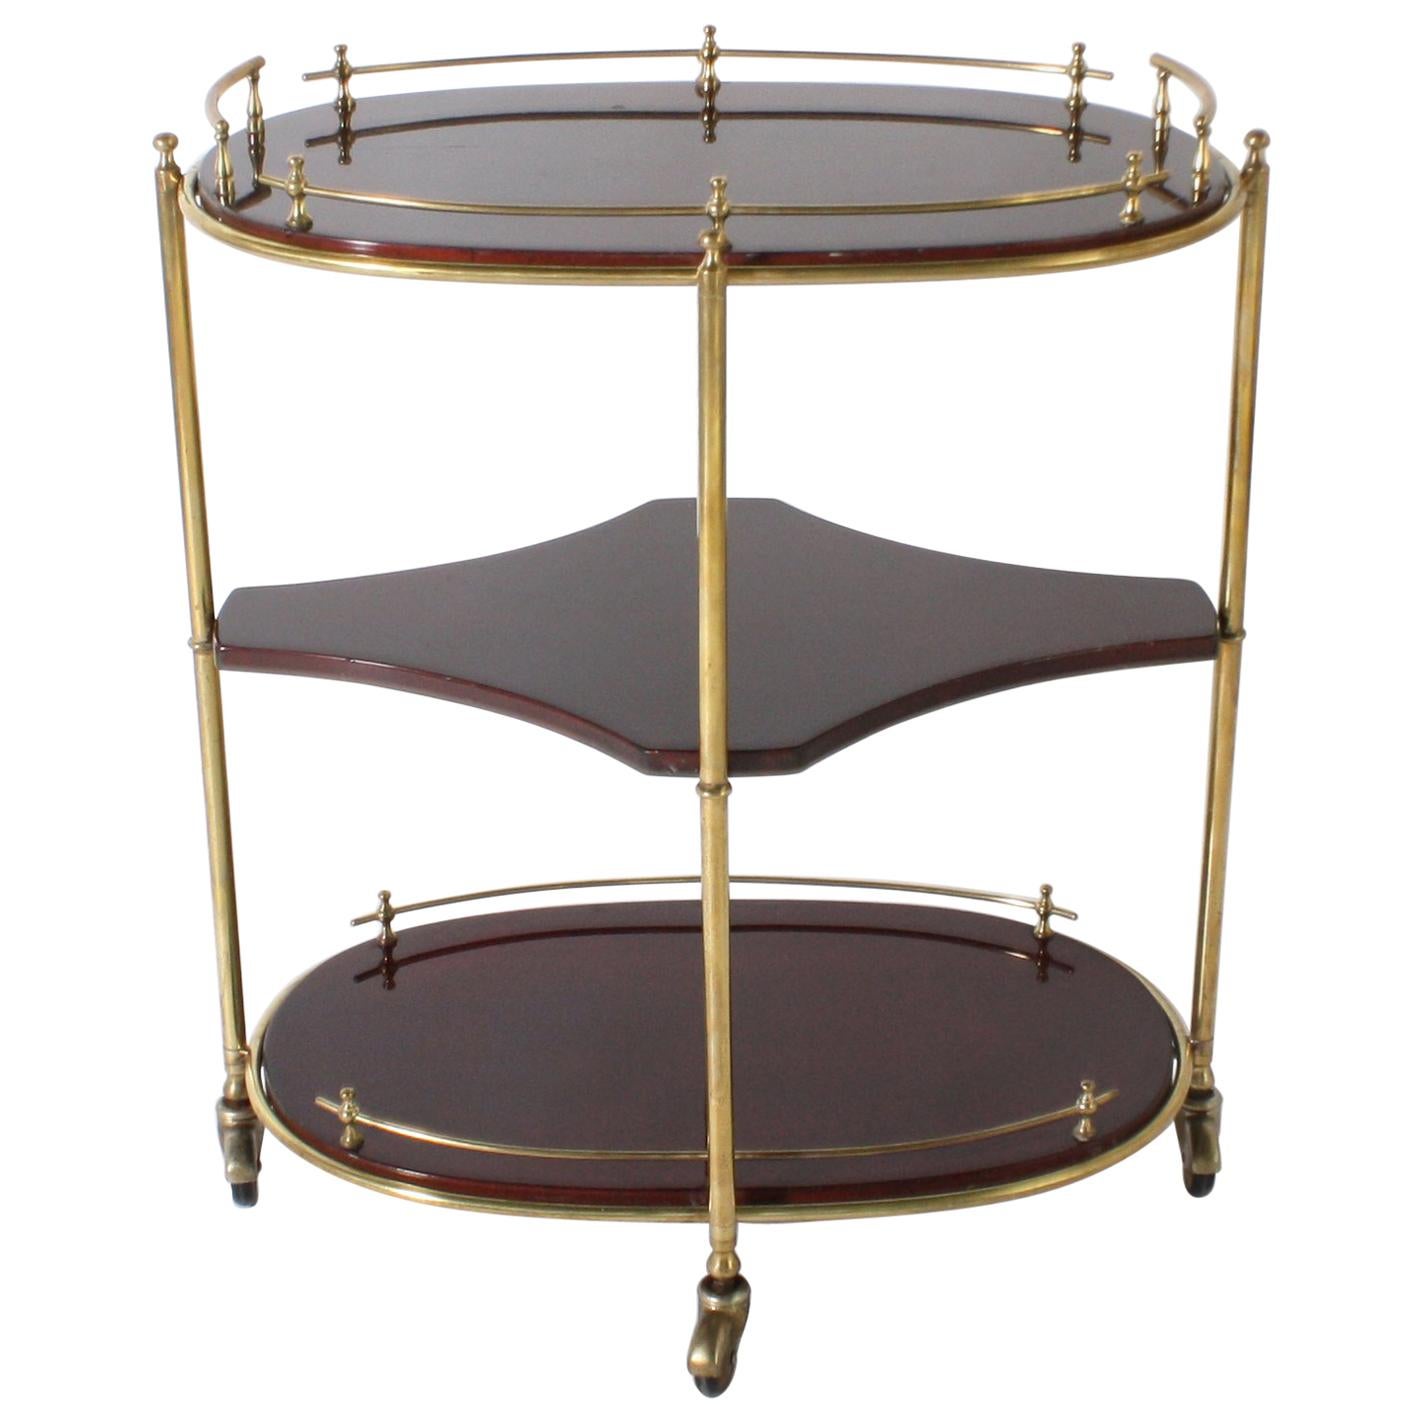 Oval Mahogany Drinks Cart with Brass Details, circa 1950